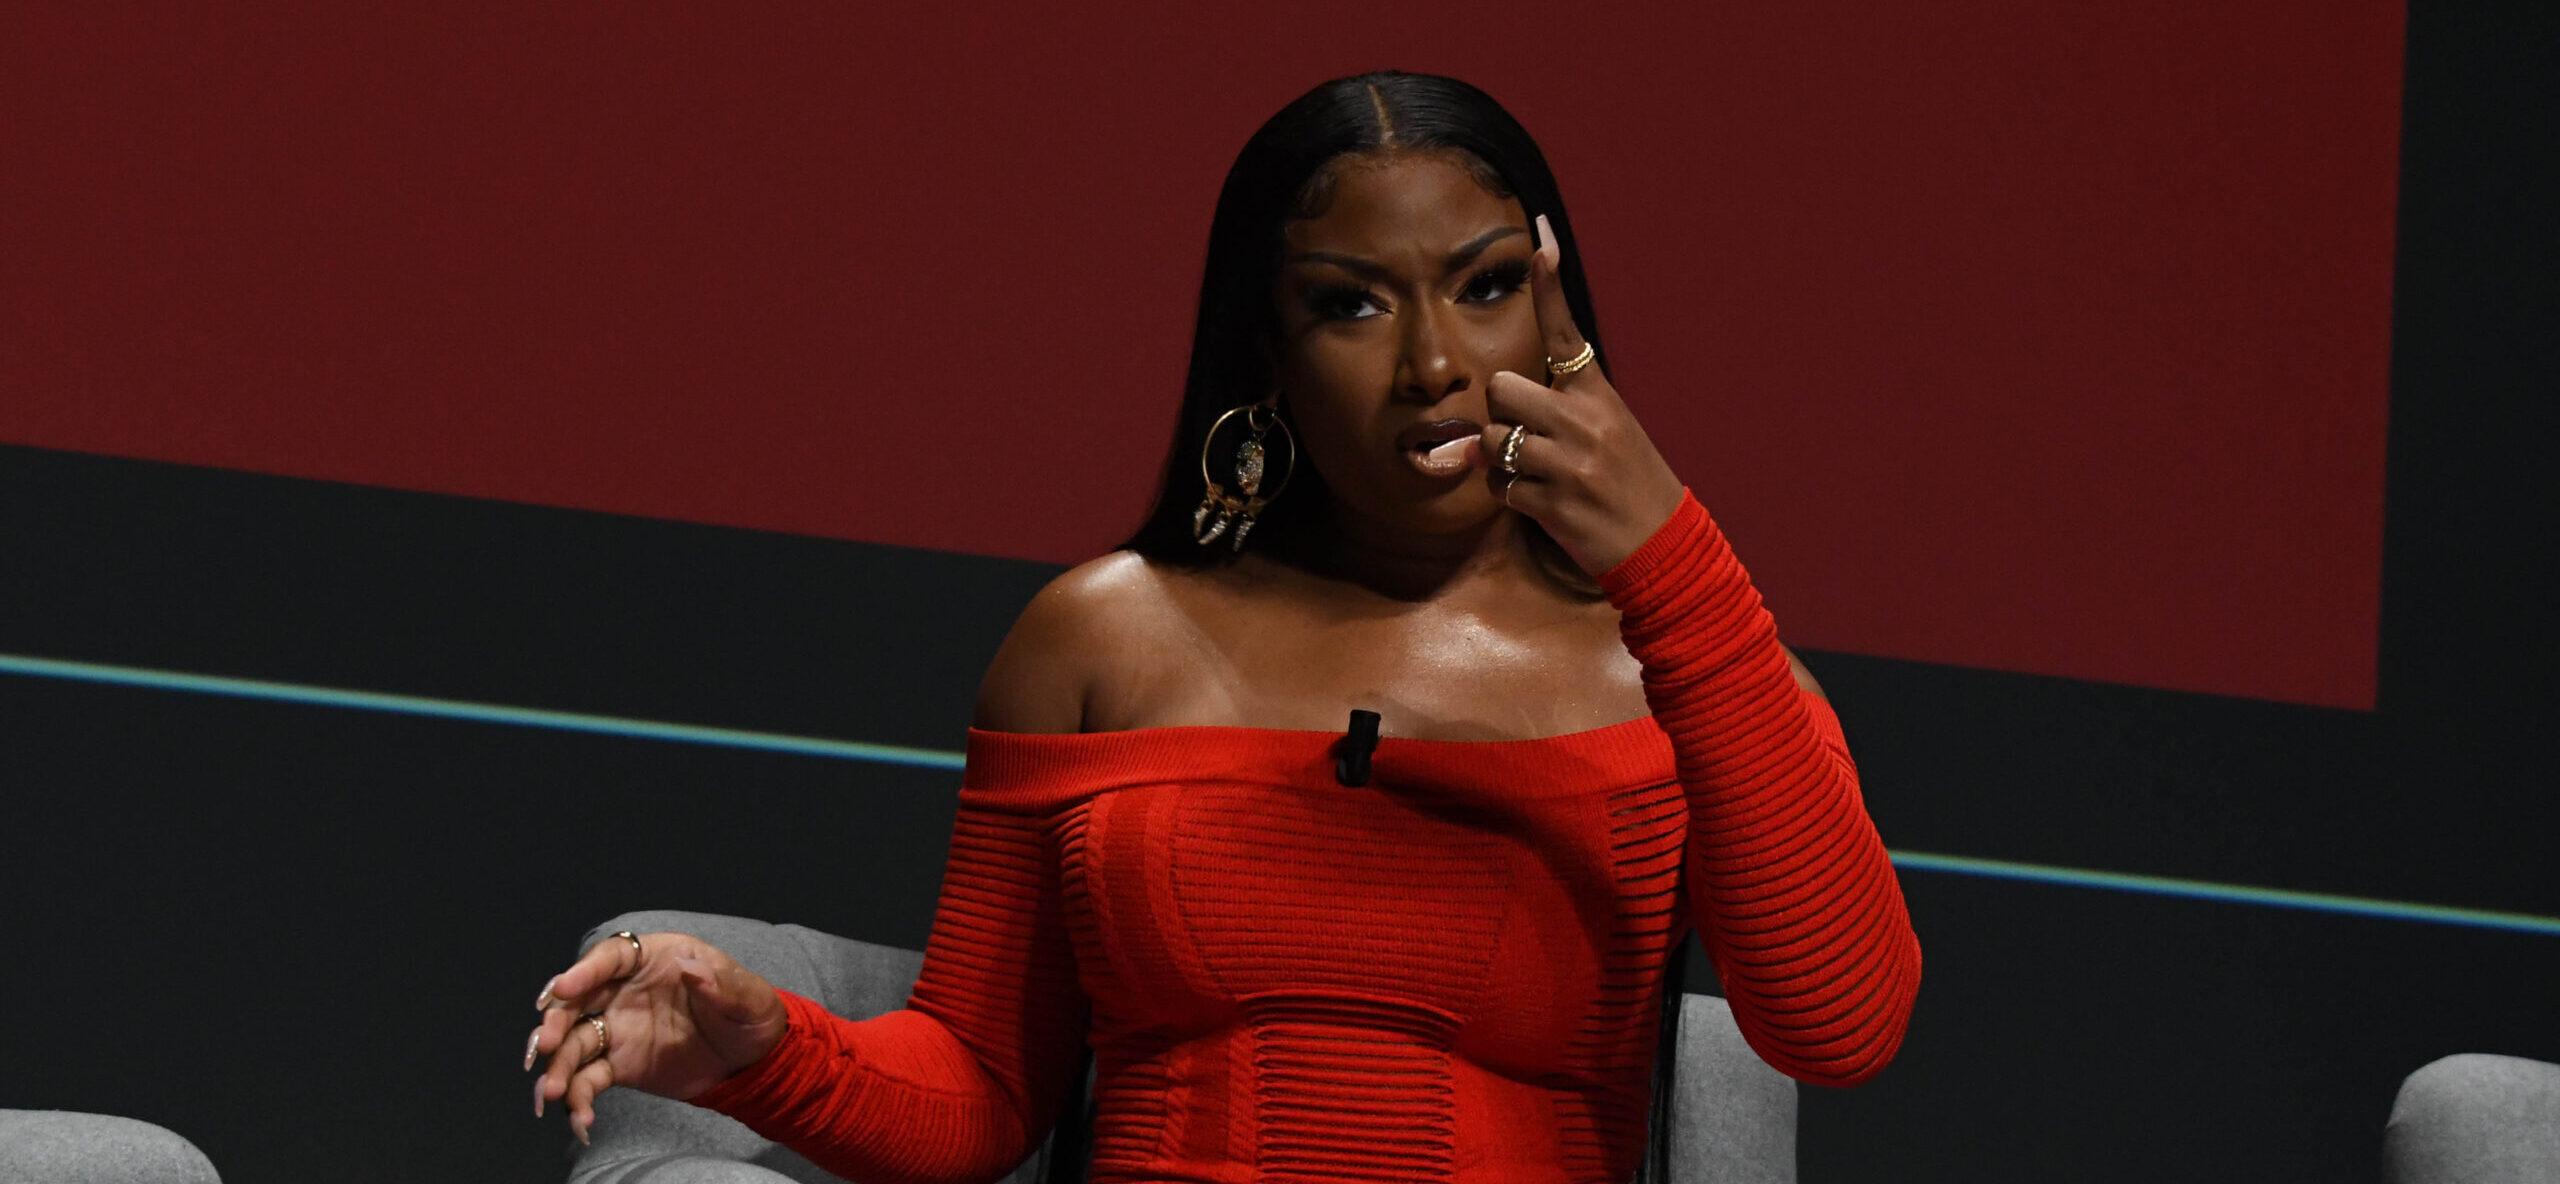 Cannes Megan Thee Stallion Speaks During Cannes Lions